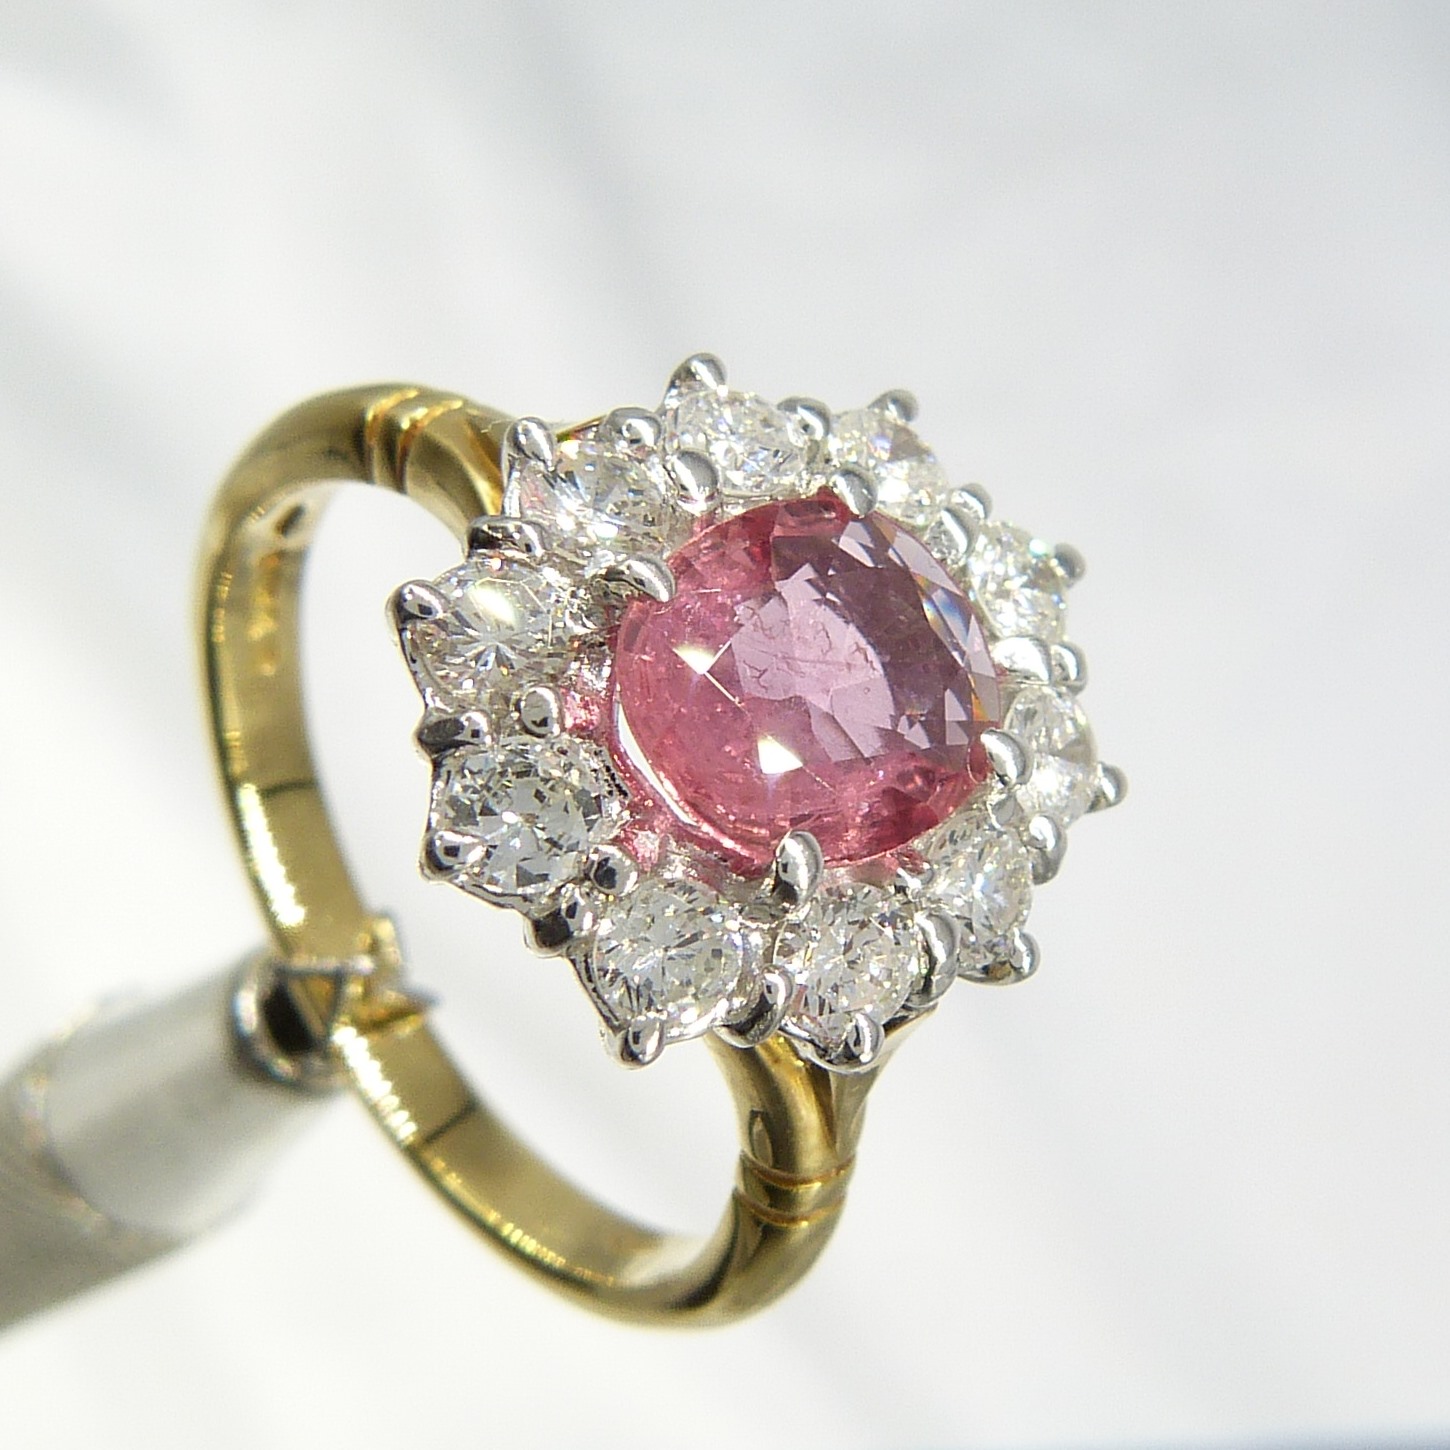 A pinkish-red natural Ruby and Diamond cluster ring in 18ct yellow and white Gold - Image 3 of 10